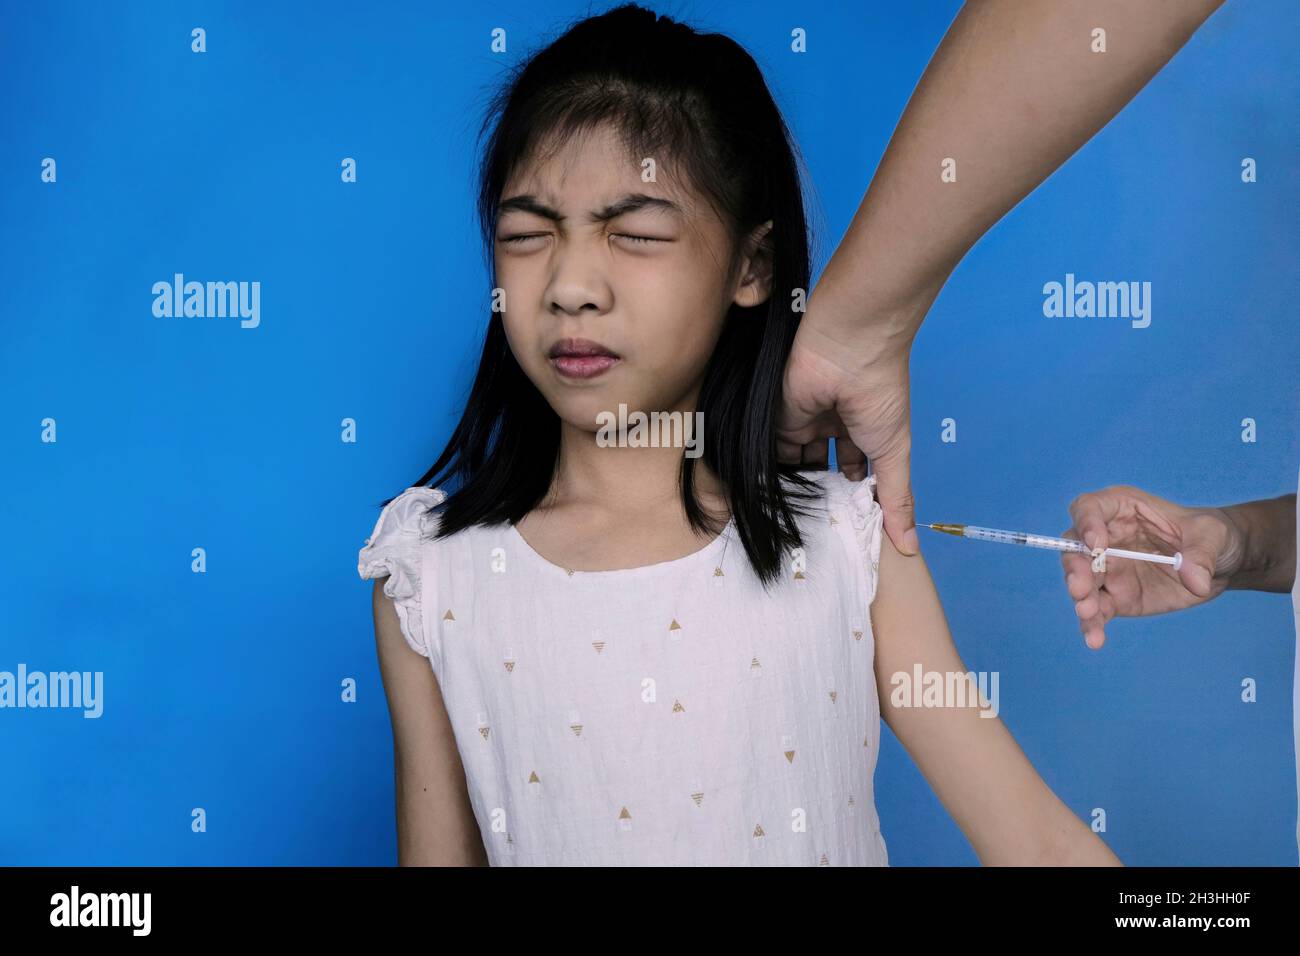 A cute young Asian girl in white dress in getting a flu vaccination shot on her shoulder by a doctor. Girl feeling scare at the hospital, closing her Stock Photo